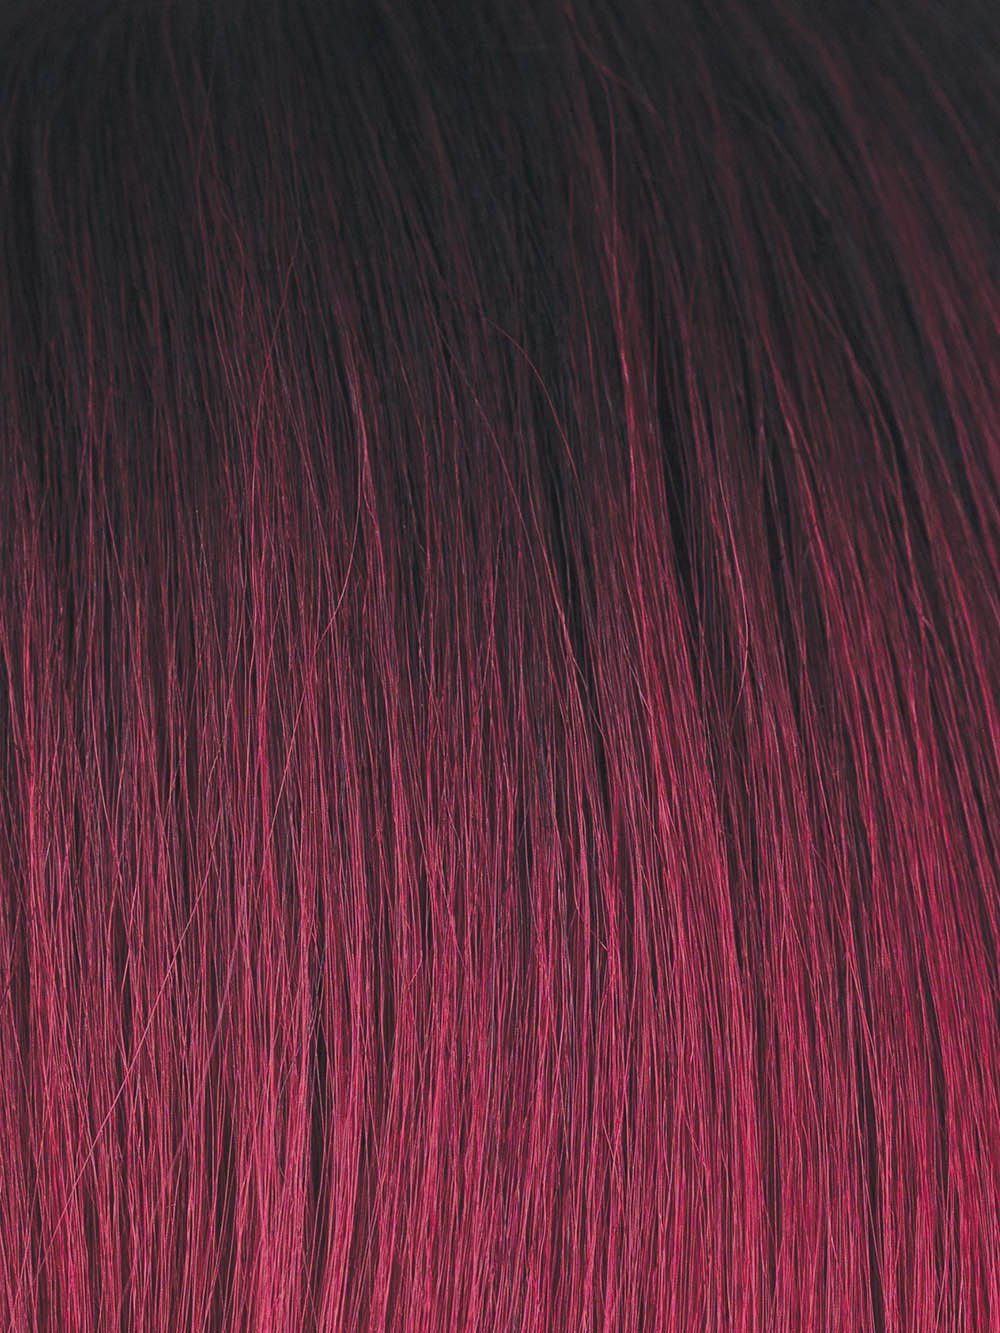 PLUM DANDY | Blend of Burgundy and Subtle Plum with Dark Brown Roots